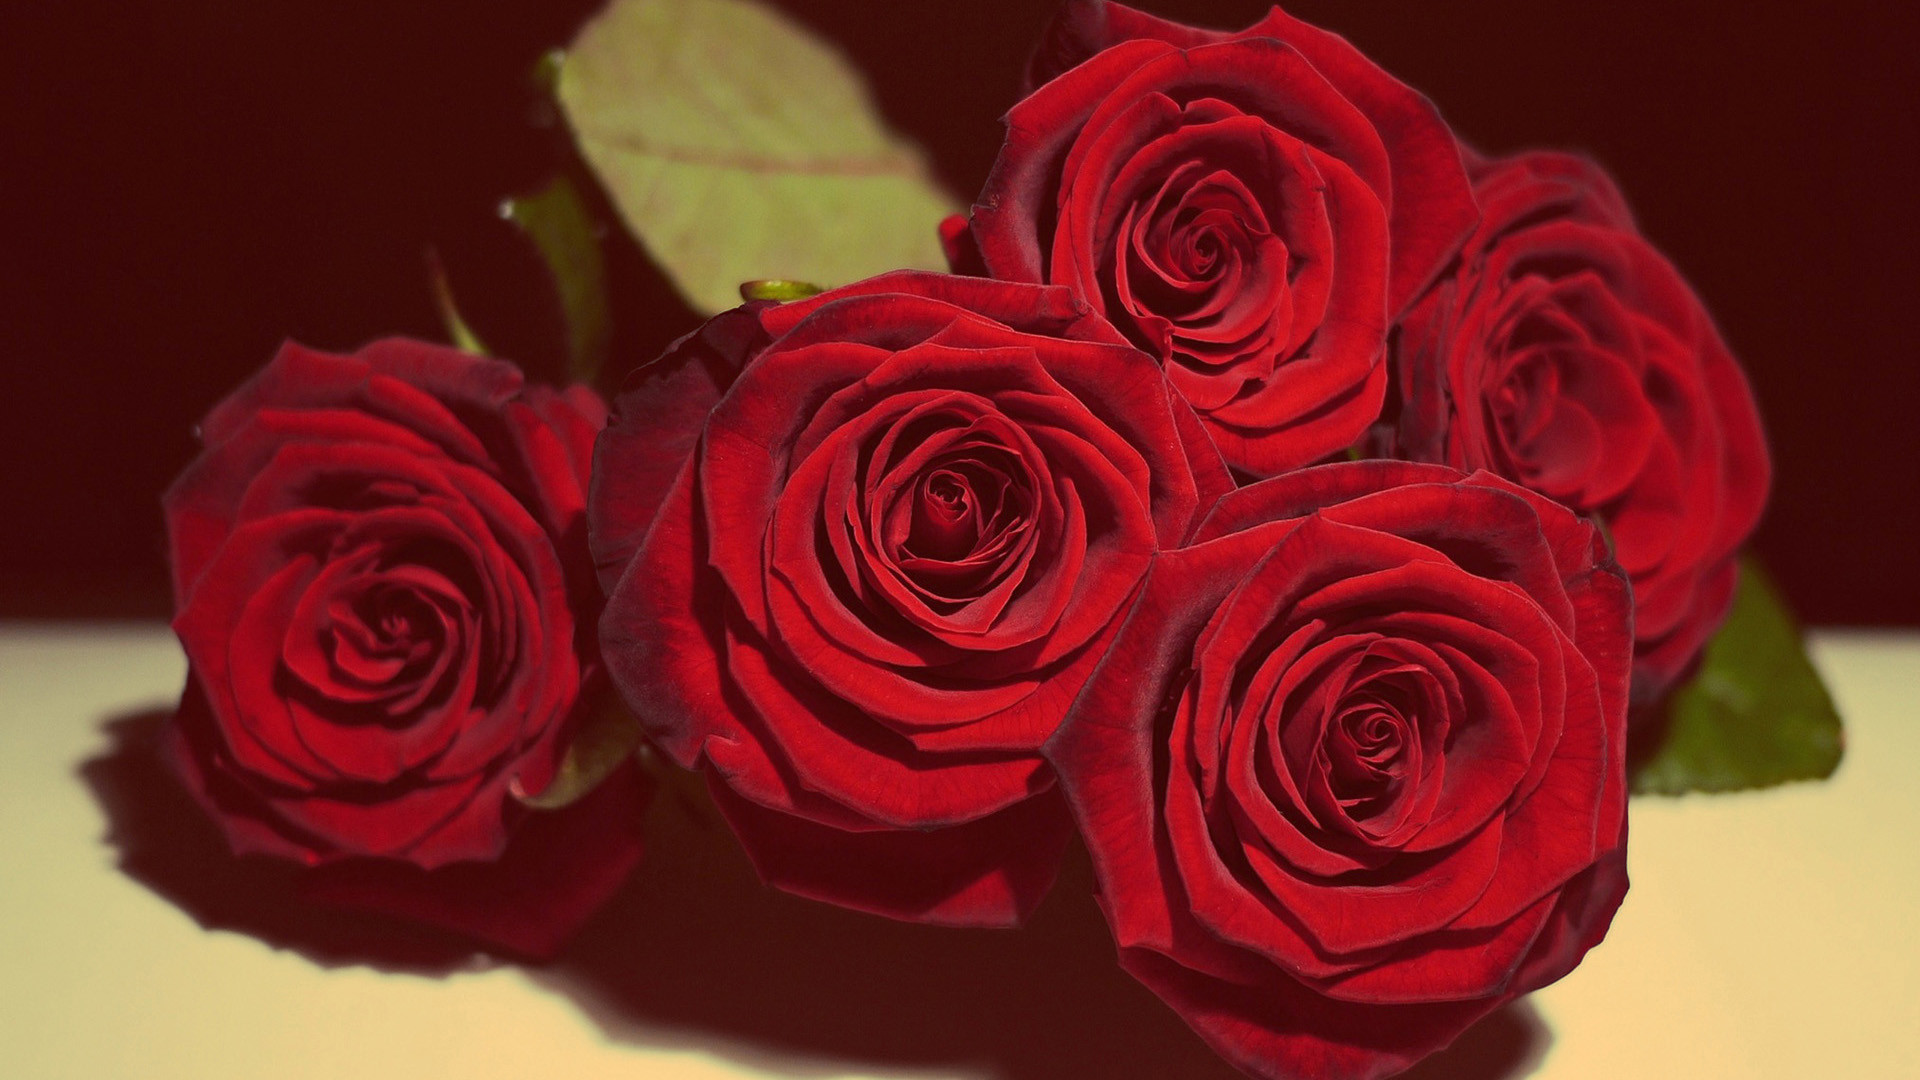 1920x1080, Live Red Roses Wallpapers Red Roses Wallpapers - Romantic Rose Red - HD Wallpaper 